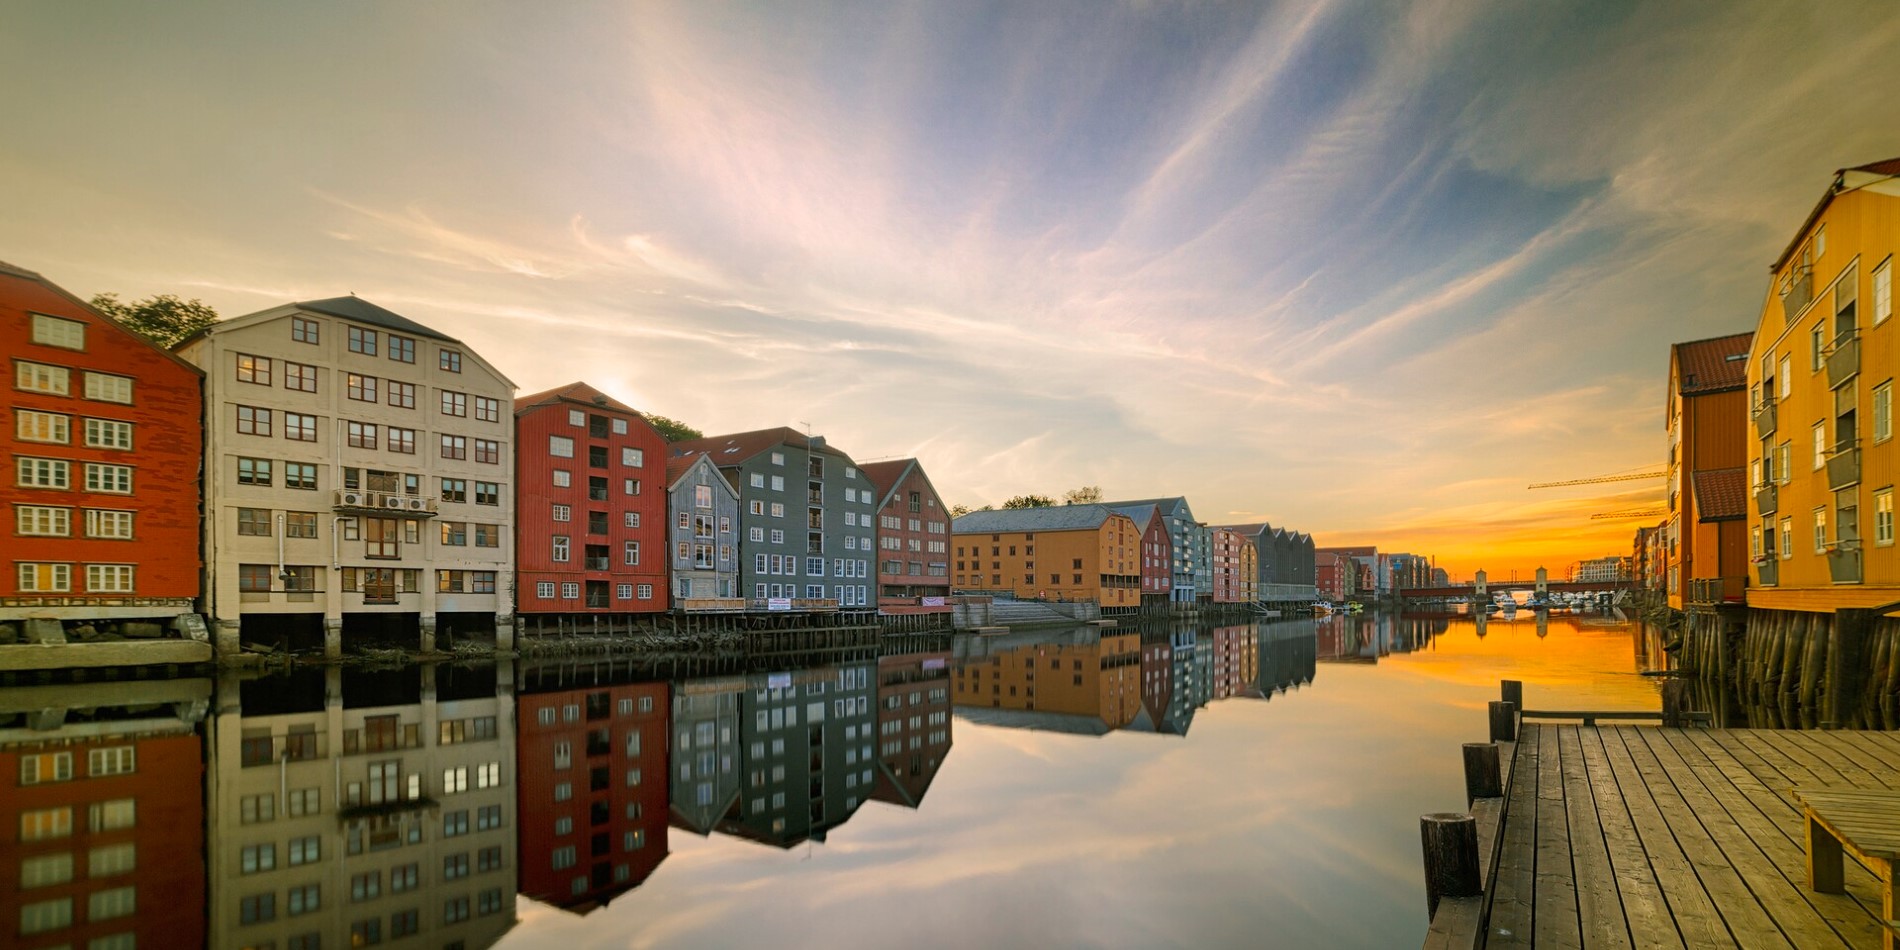 Sunset over the canal in Trondheim